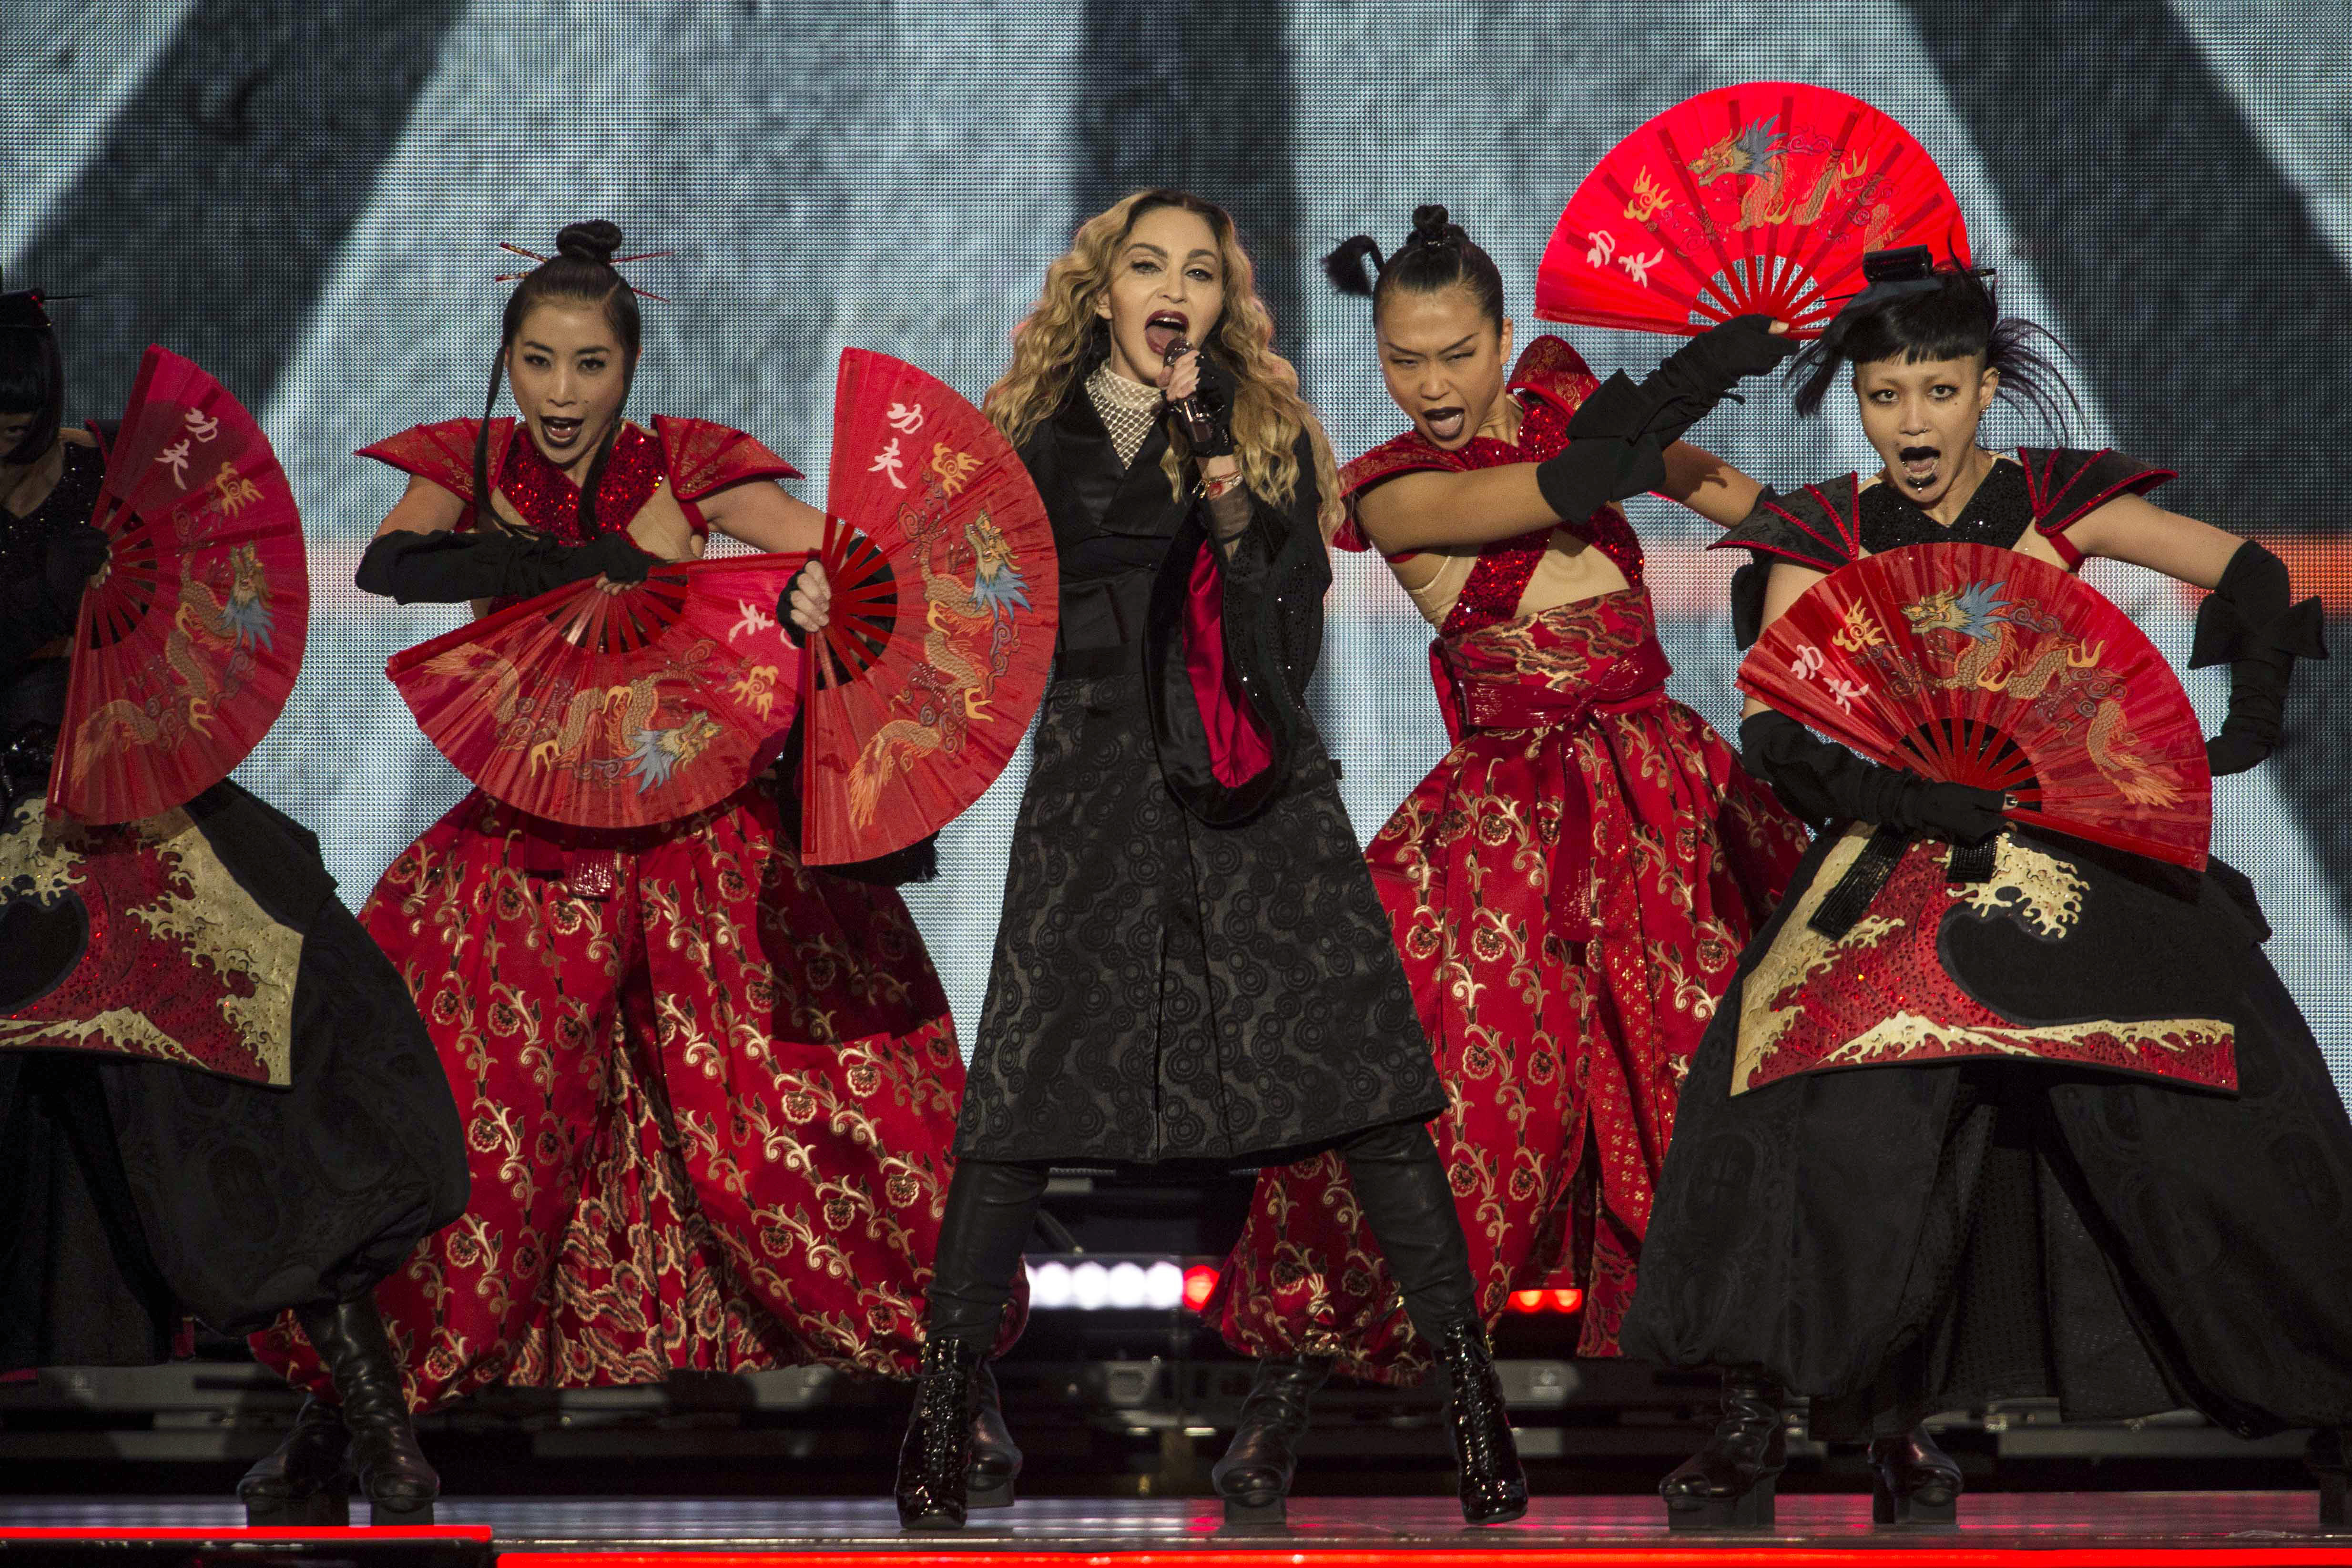 Madonna, center, performs in concert with dancers during her "Rebel Heart Tour" in Mexico City, Wednesday, Jan. 6, 2016. (AP Photo/Christian Palma)